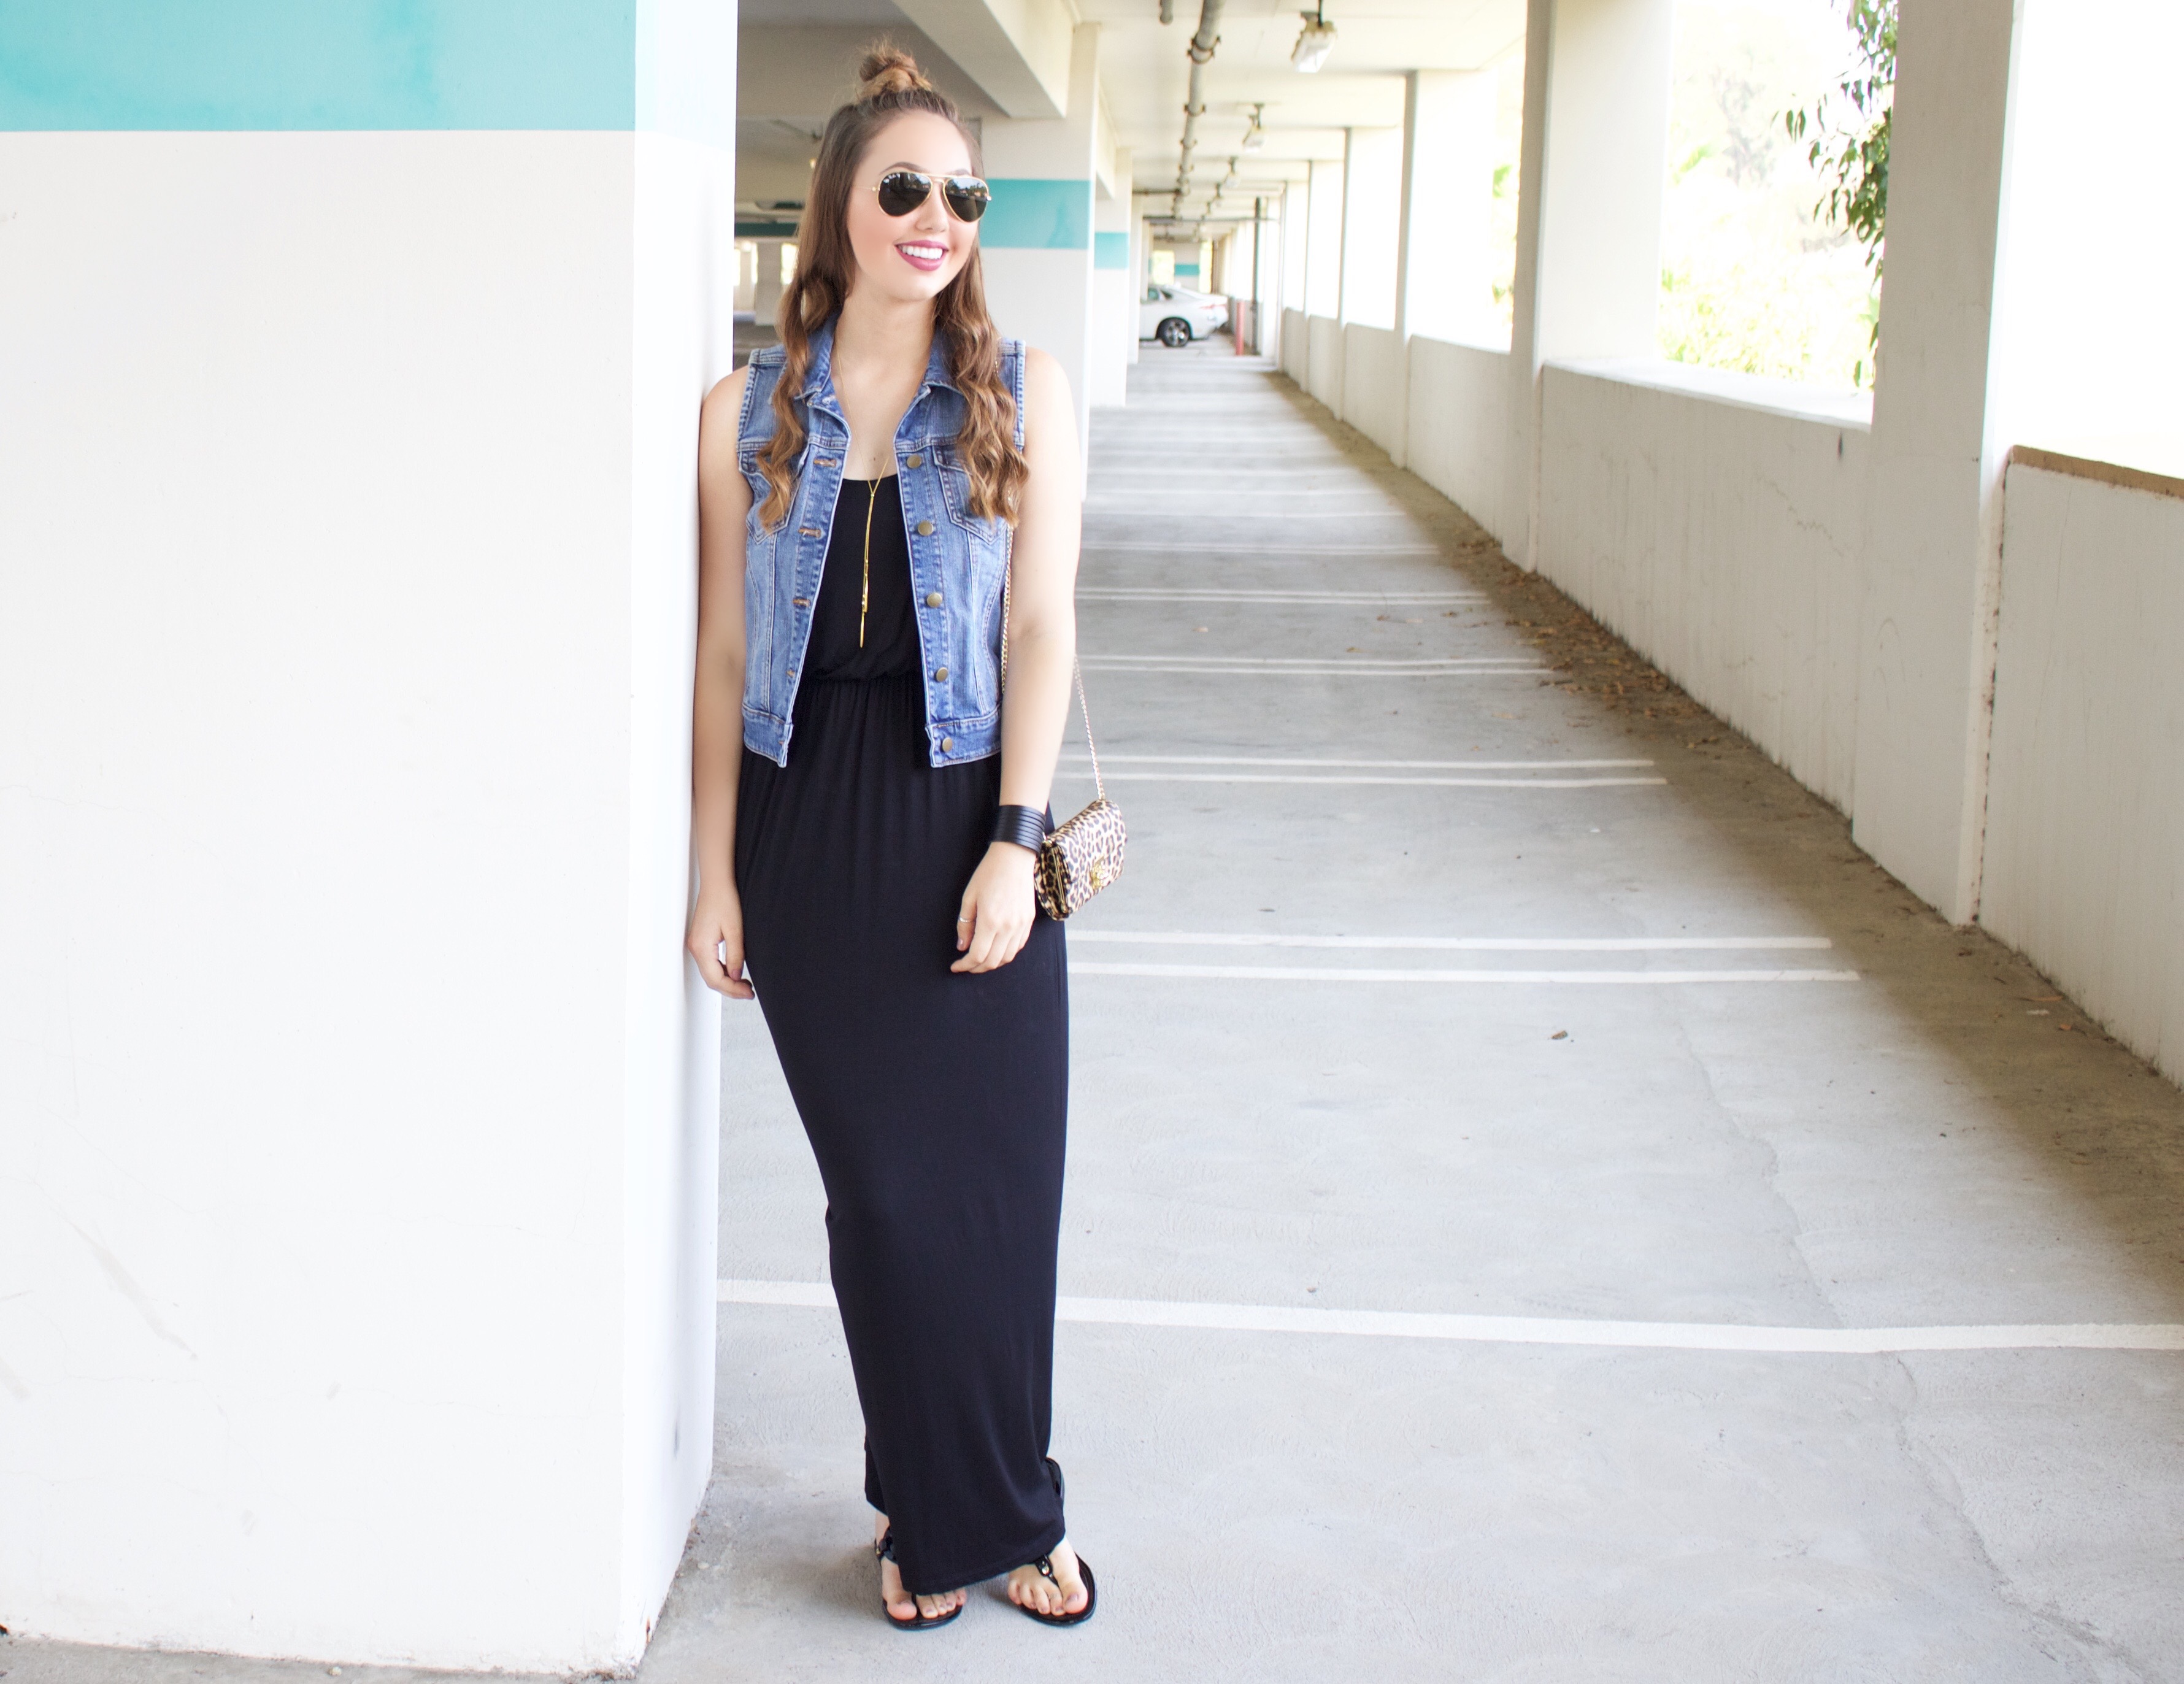 How to Style a Maxi Dress - My Styled LifeA